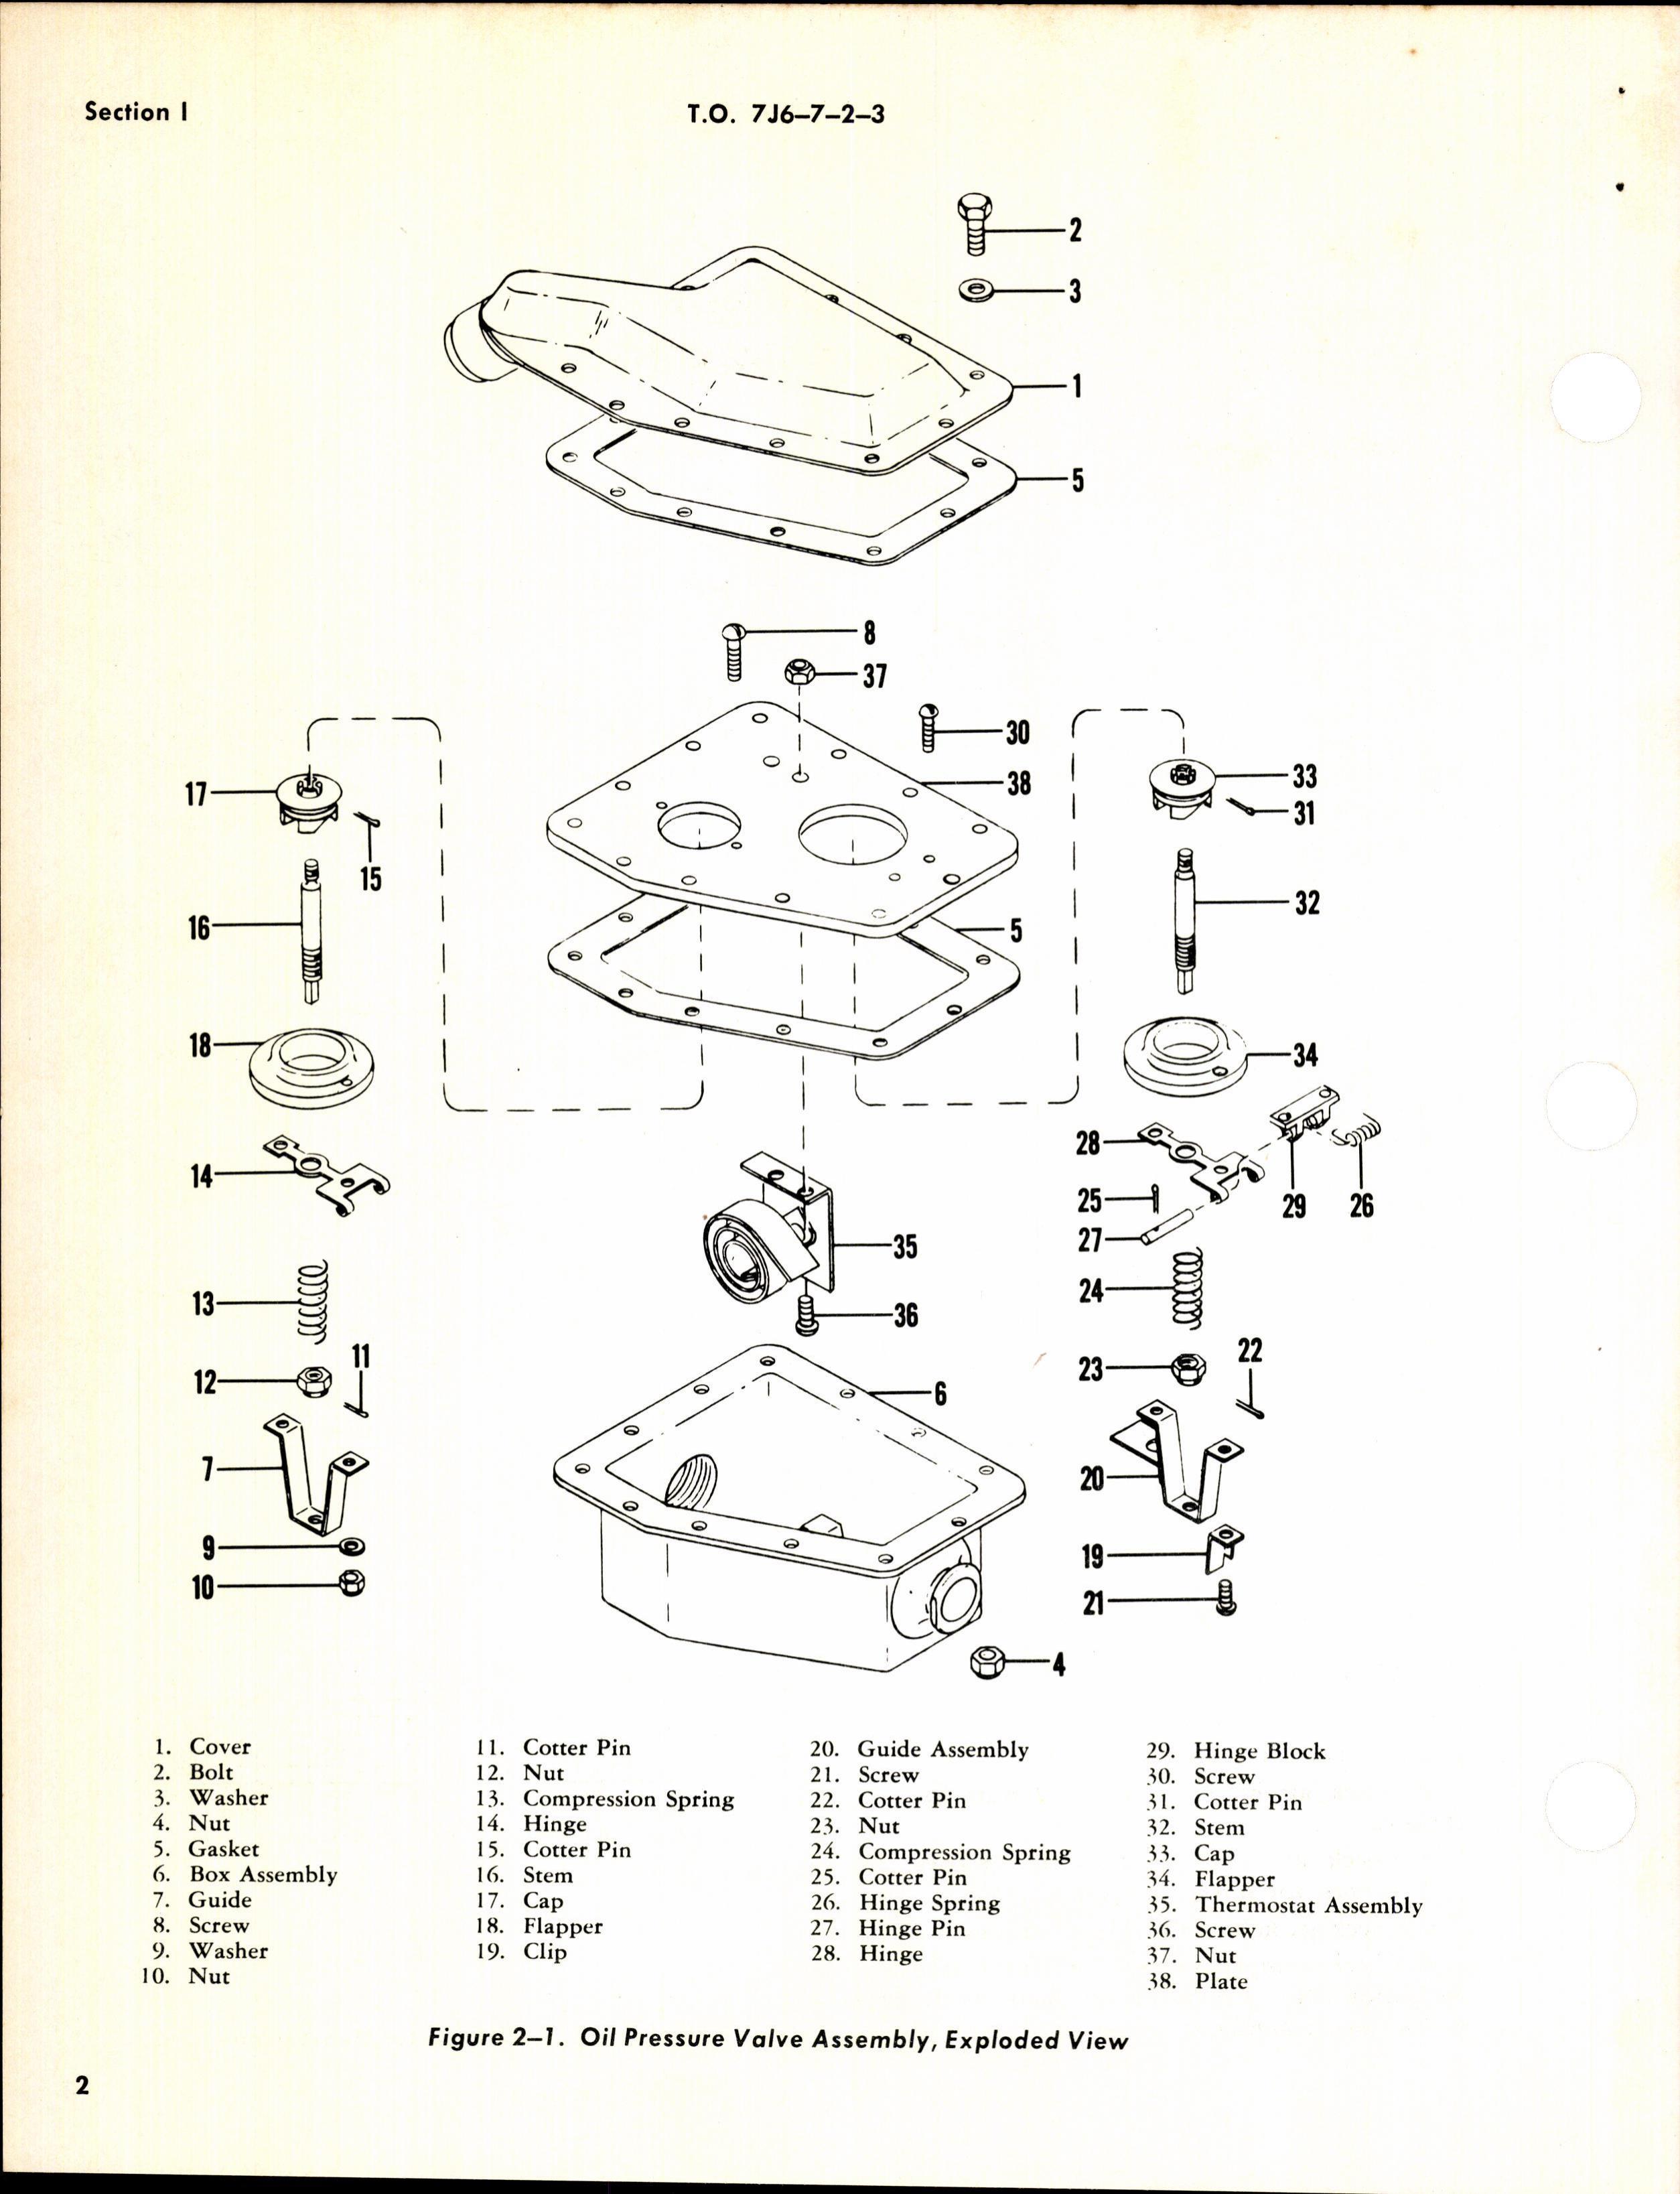 Sample page 6 from AirCorps Library document: Overhaul Instructions for Valve Assembly - Oil Pressure Part # 15-25641-20, -21